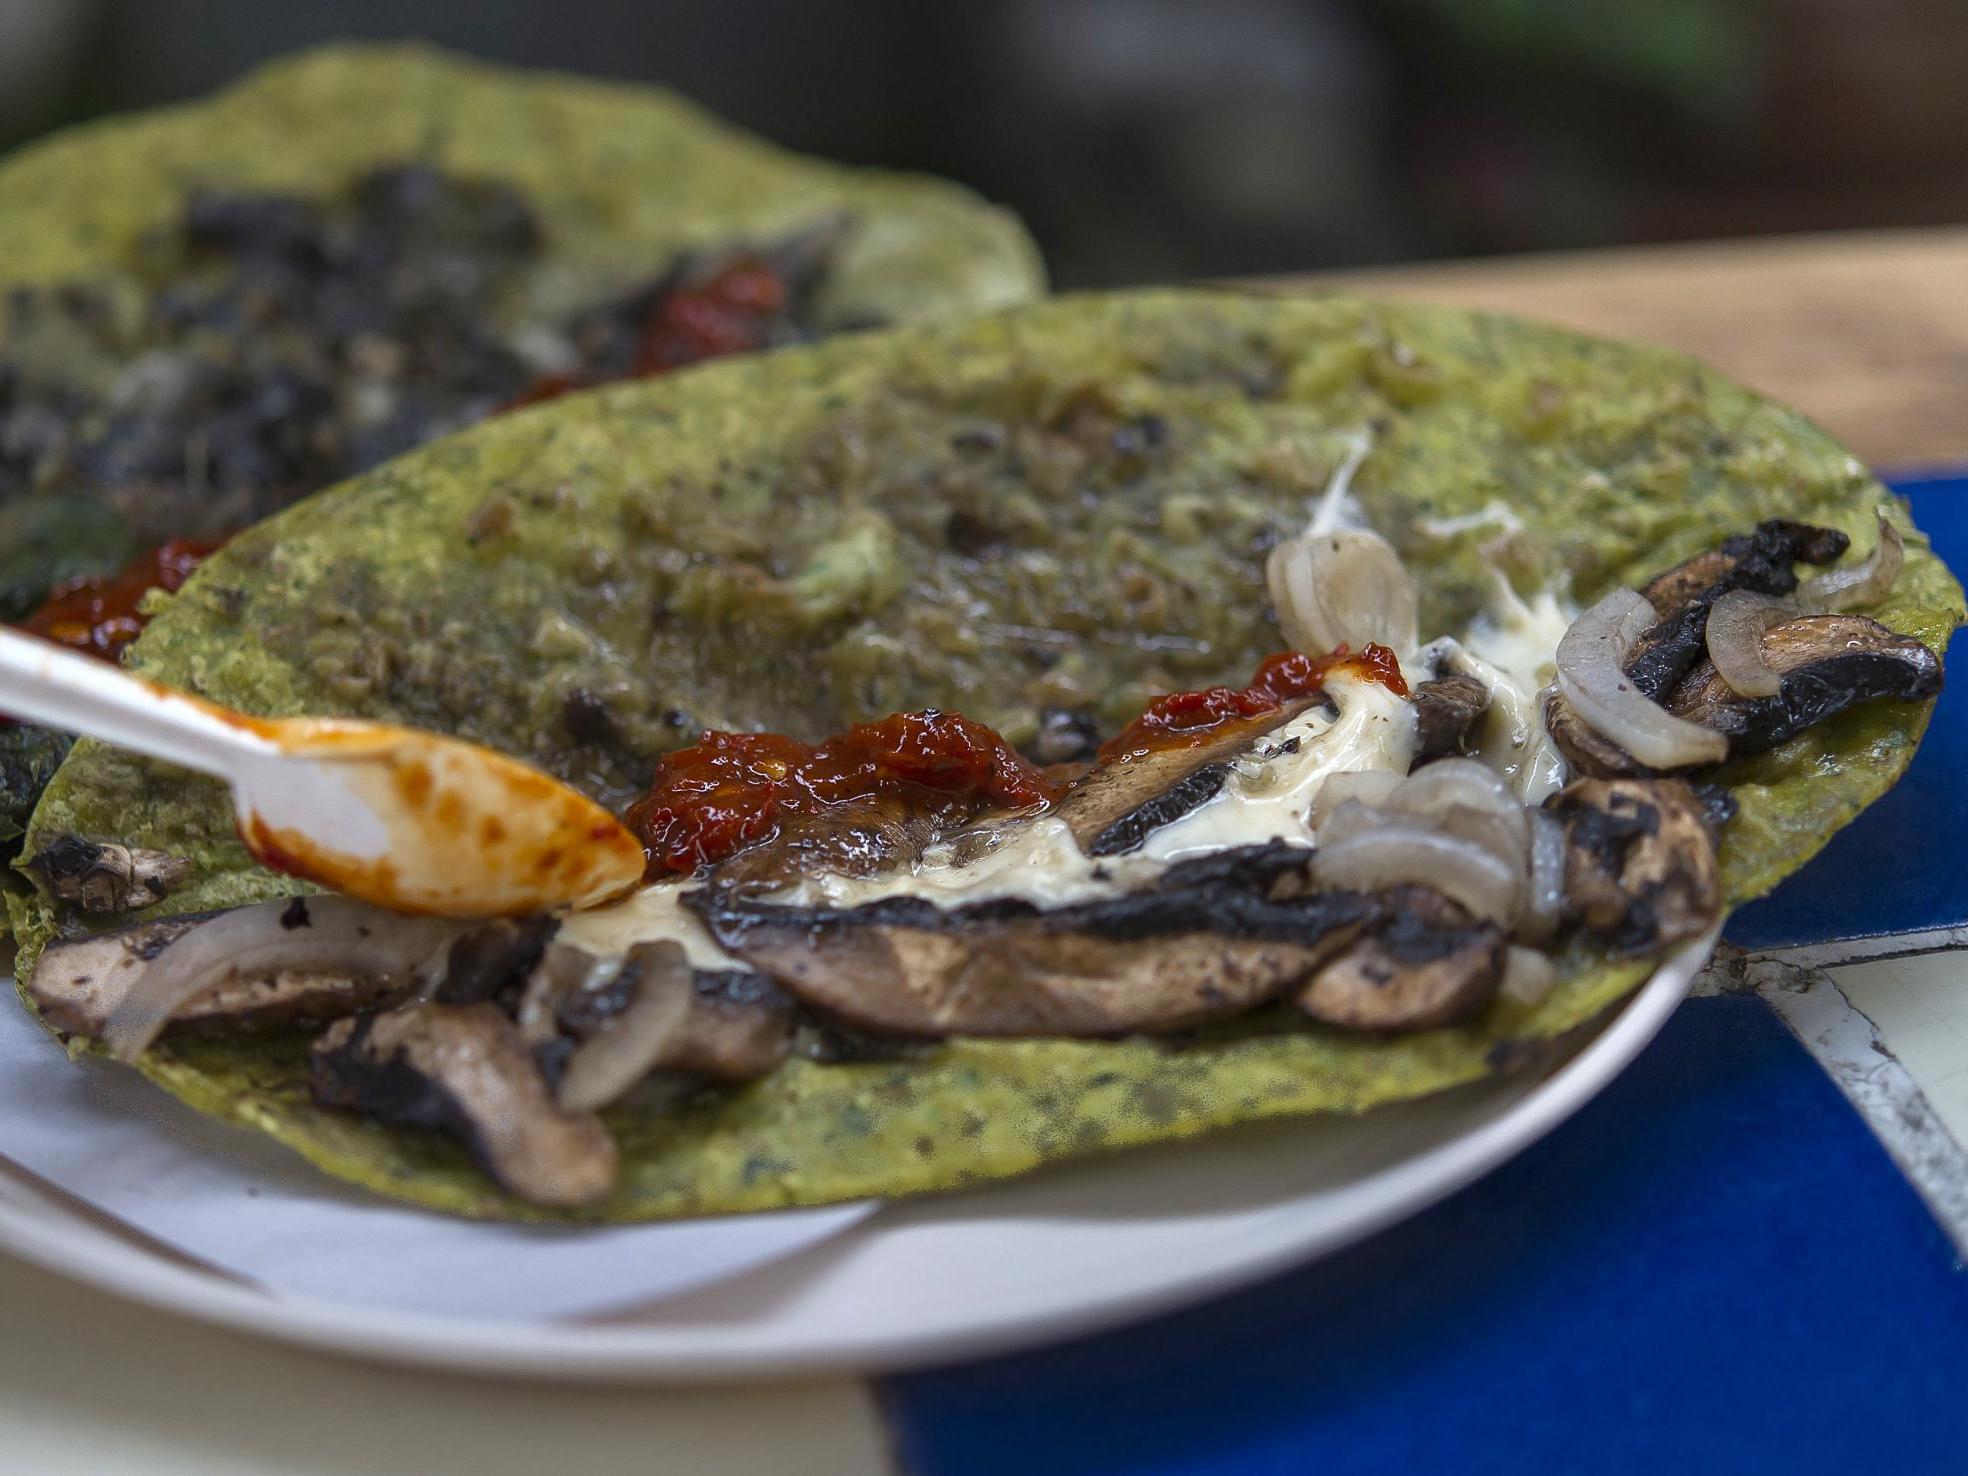 Pictured: The real deal tortilla, found in Mexico.